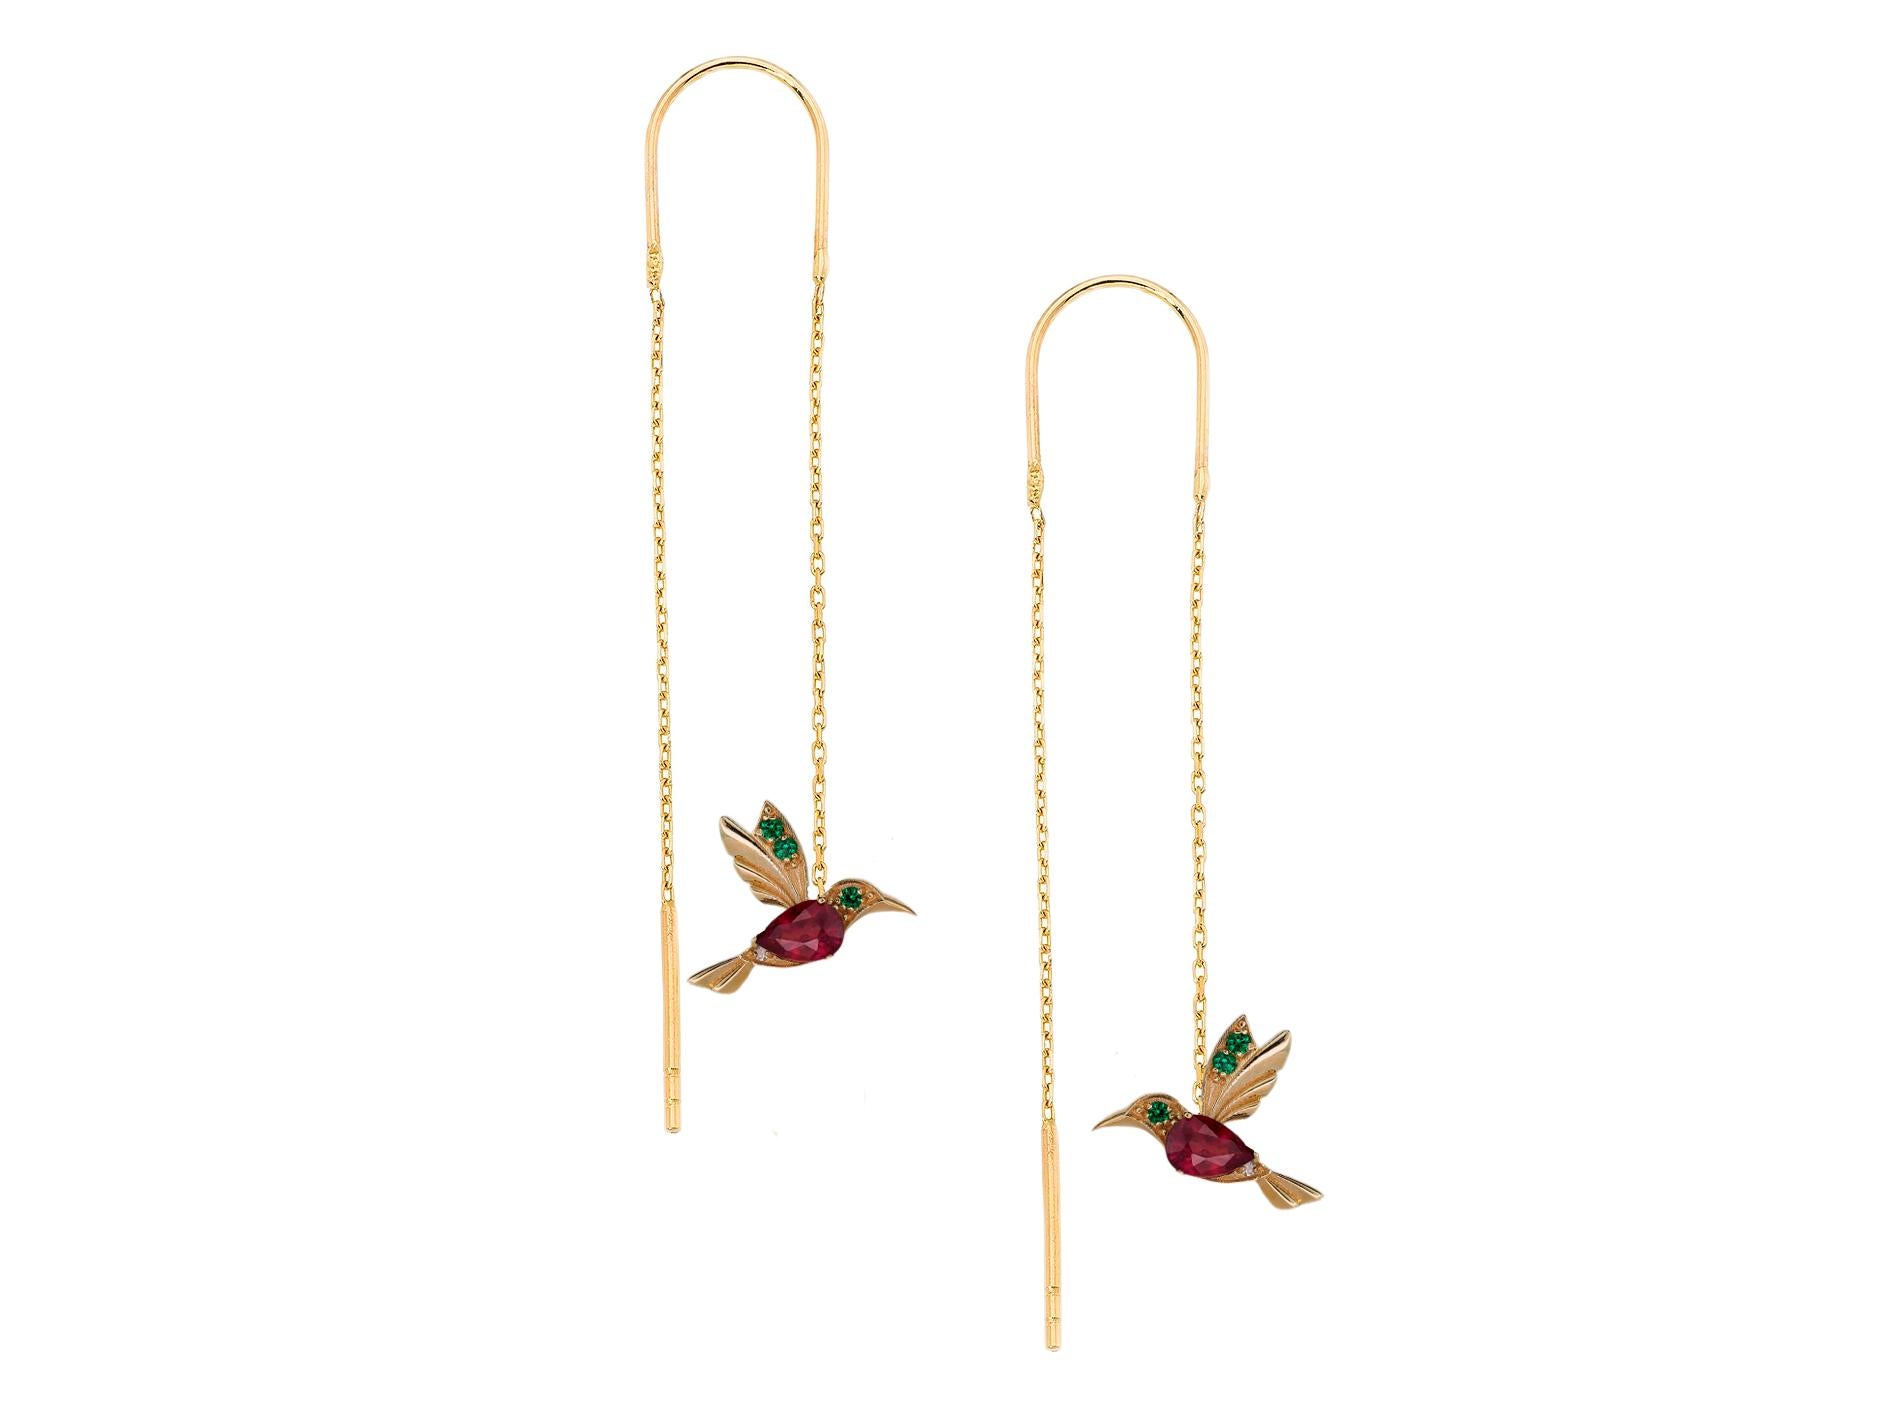 Hummingbird Threader earrings with rubies in 14k gold. 

Bird Earrings with gems. Ruby july birthstone earrings. Pear ruby earrings.

Metal: 14 karat gold
Weight: 2.95 g.
Size:  44mm - chain length,  11.73 x 15.85 mm. - pendant size.

Central